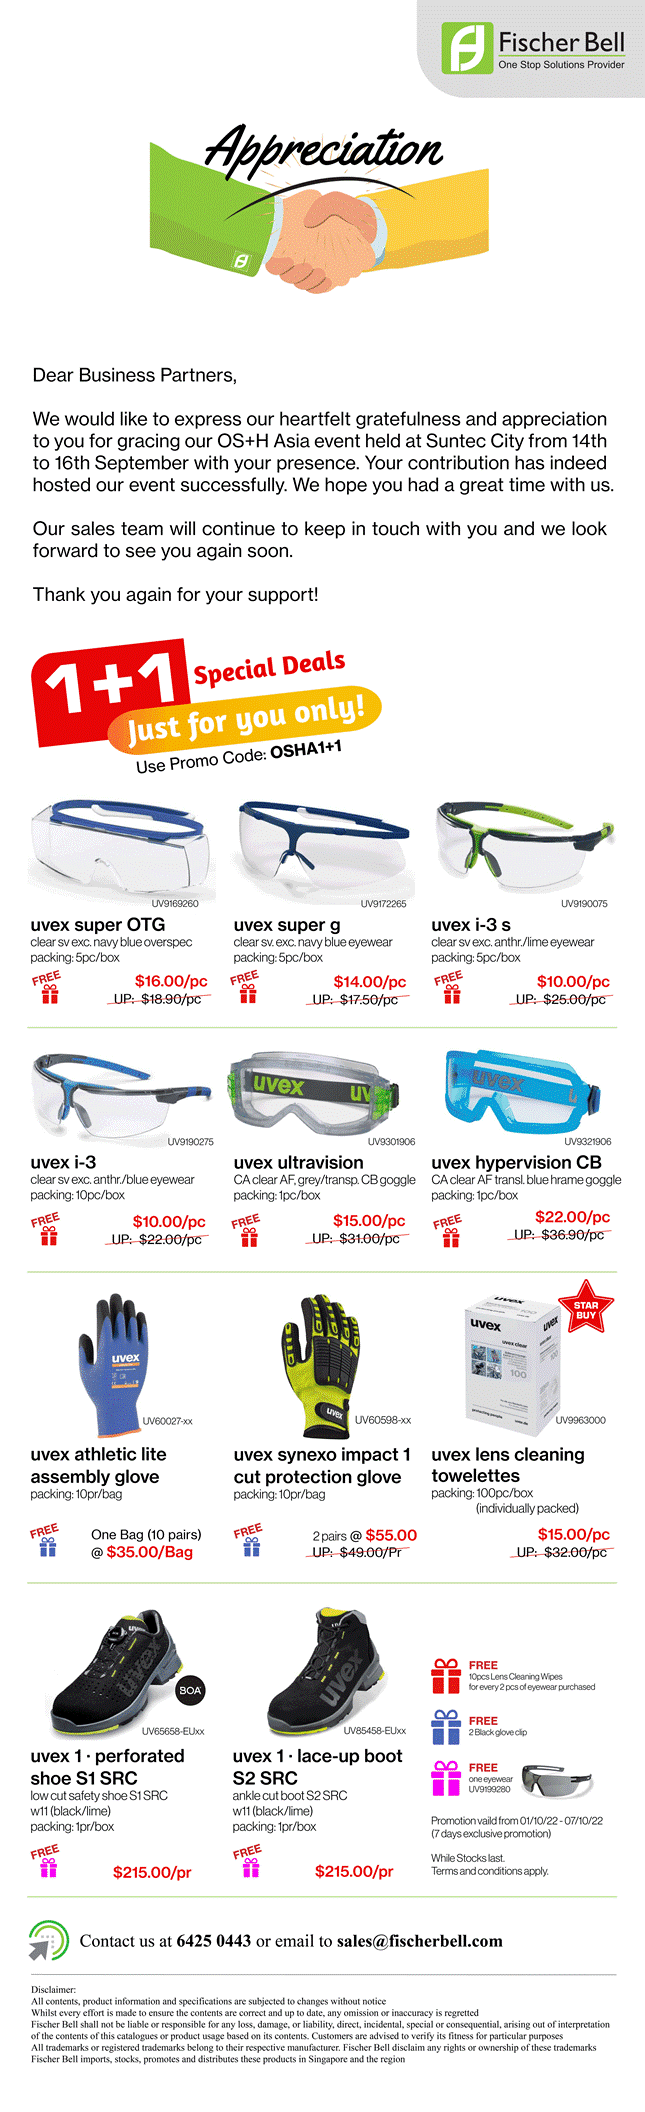 Thank you for your support at the OSHA show! We have various offers and deals up for grabs now!